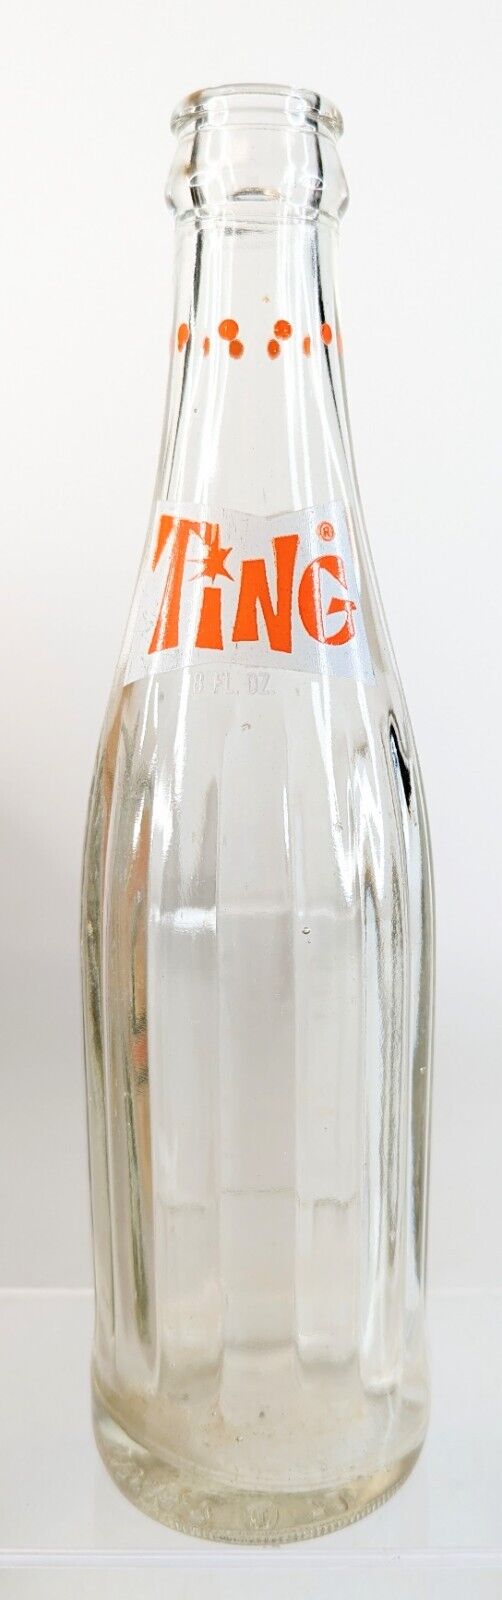 Vintage TING Soda Pop Glass Bottle, 8 Ounces from Waupaca WI, Dots on Neck